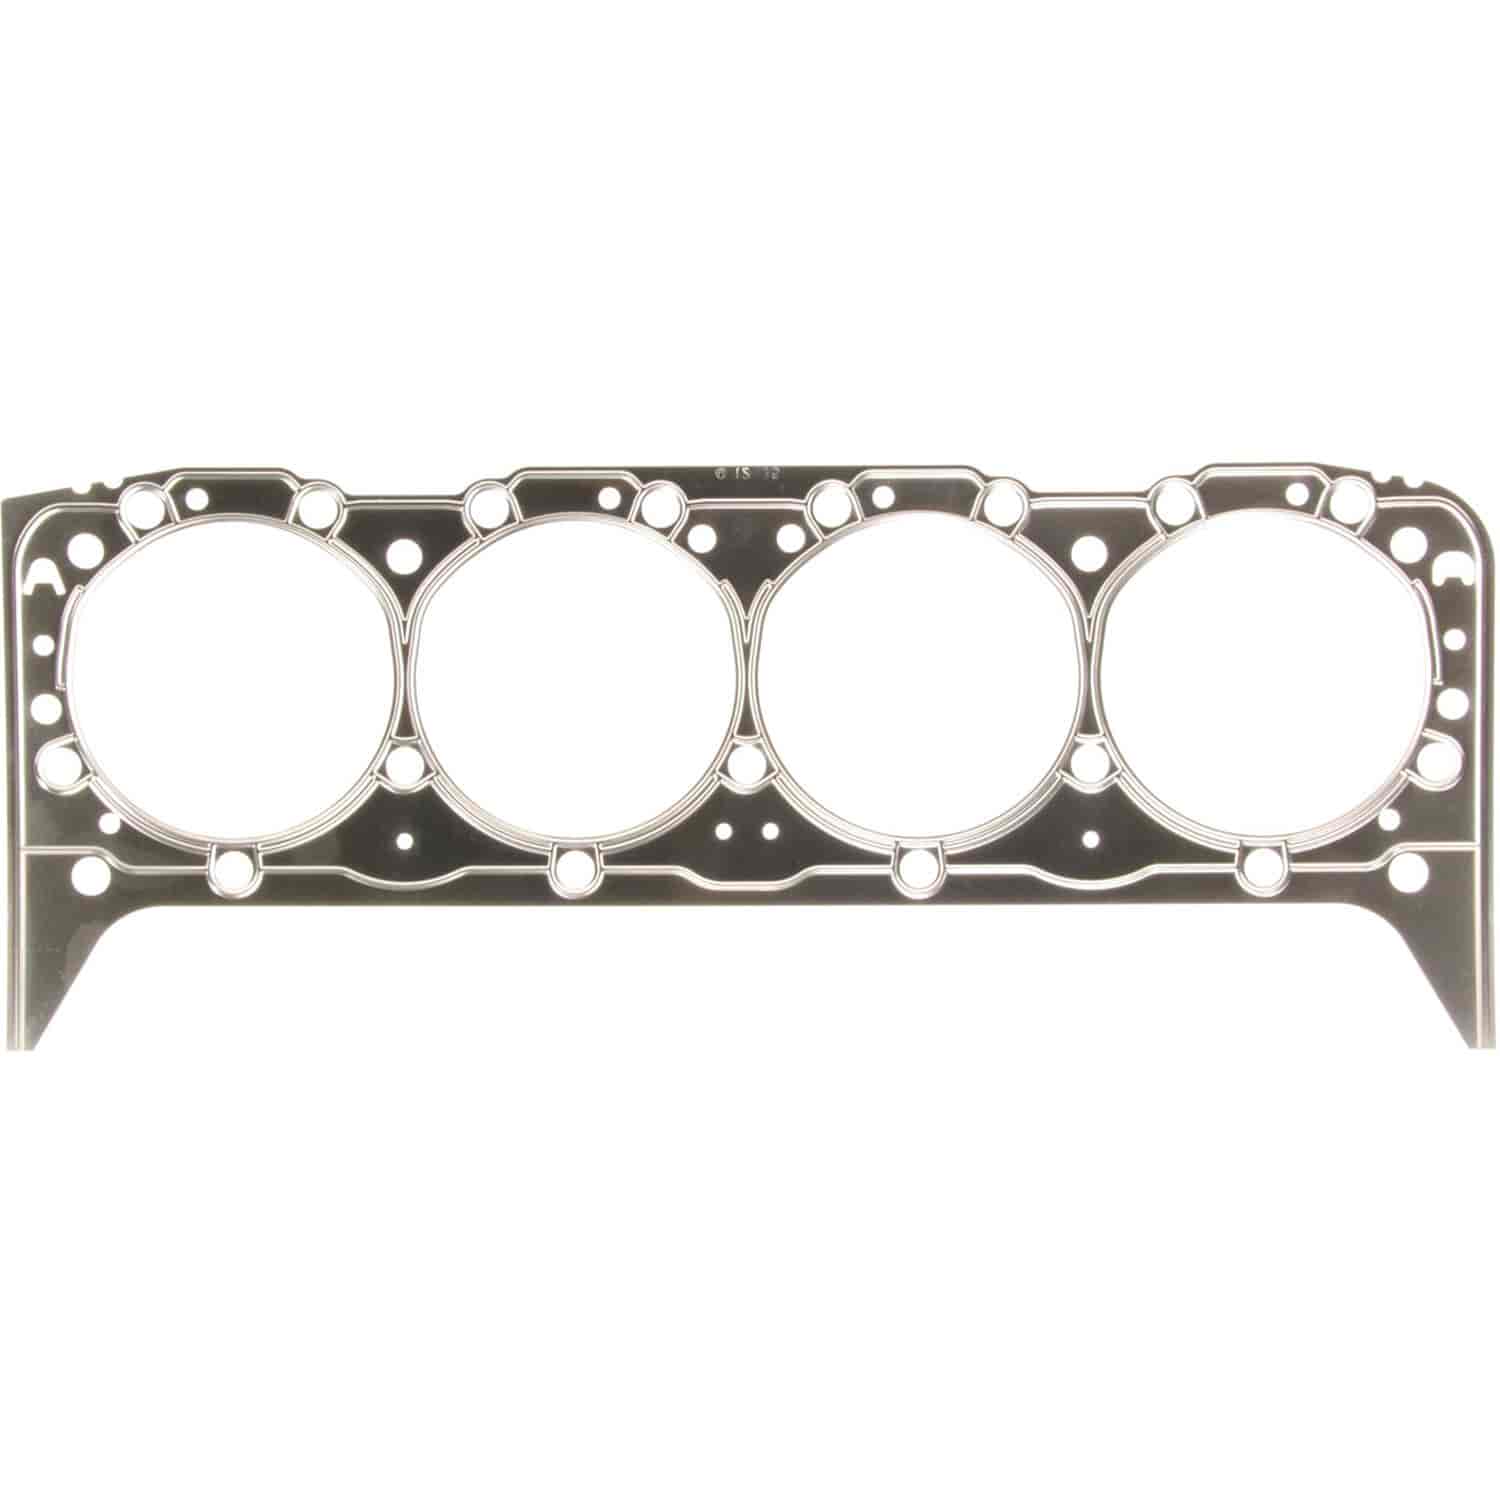 Performance Head Gasket 1957-2002 Small Block Chevy 283/302/327/350/400